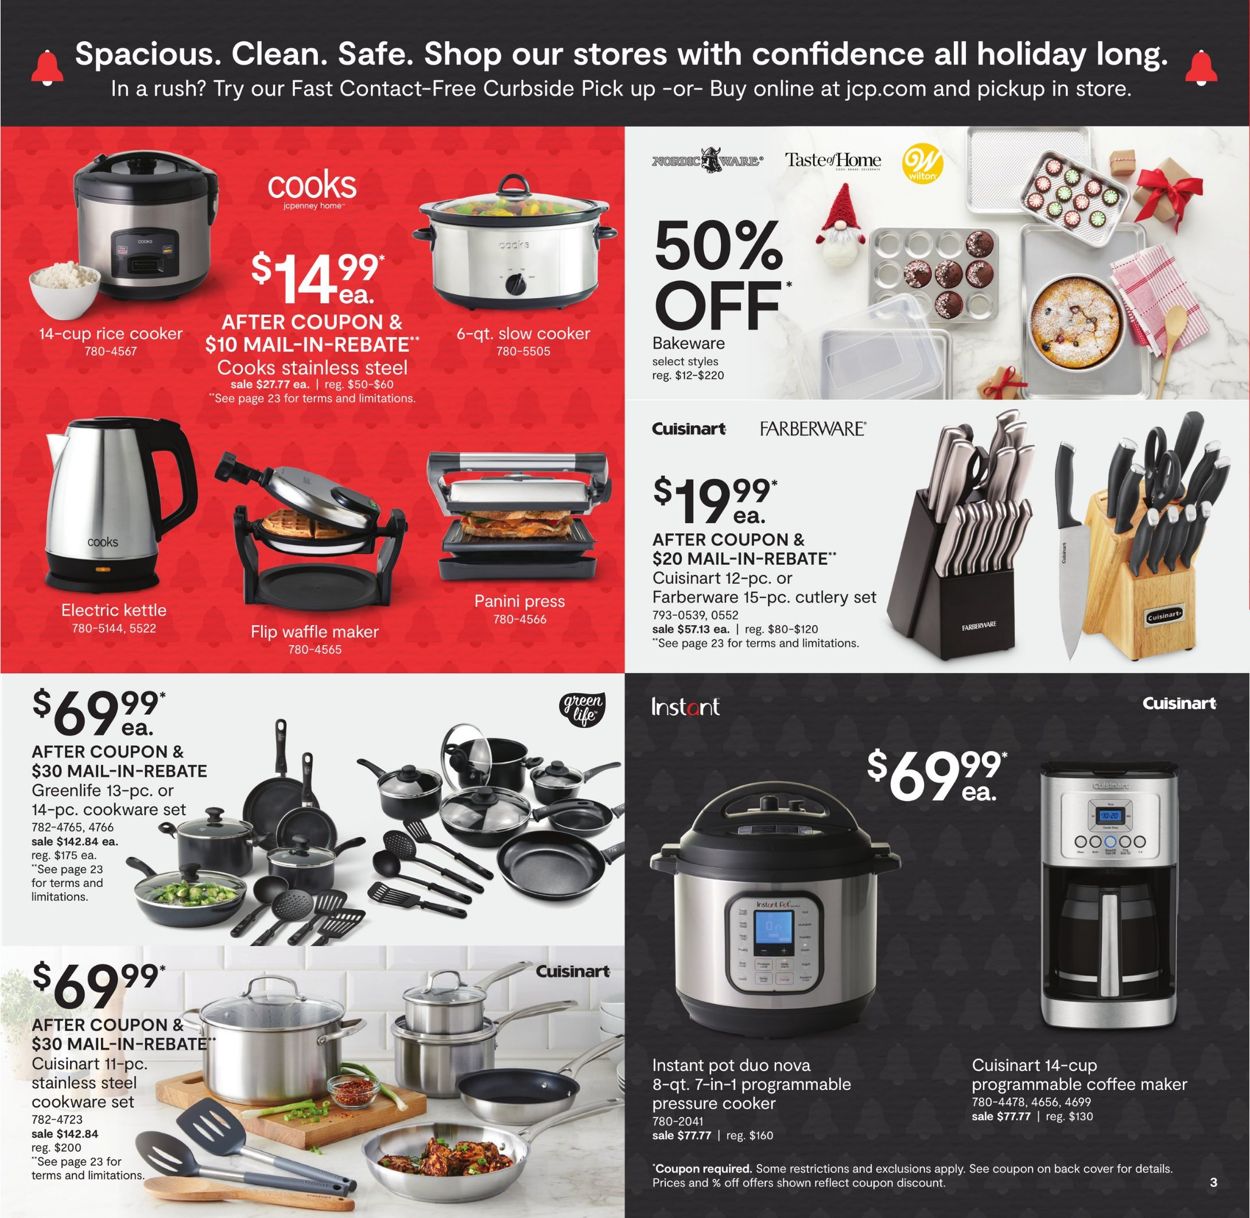 jcpenney-black-friday-2020-current-weekly-ad-11-25-11-28-2020-3